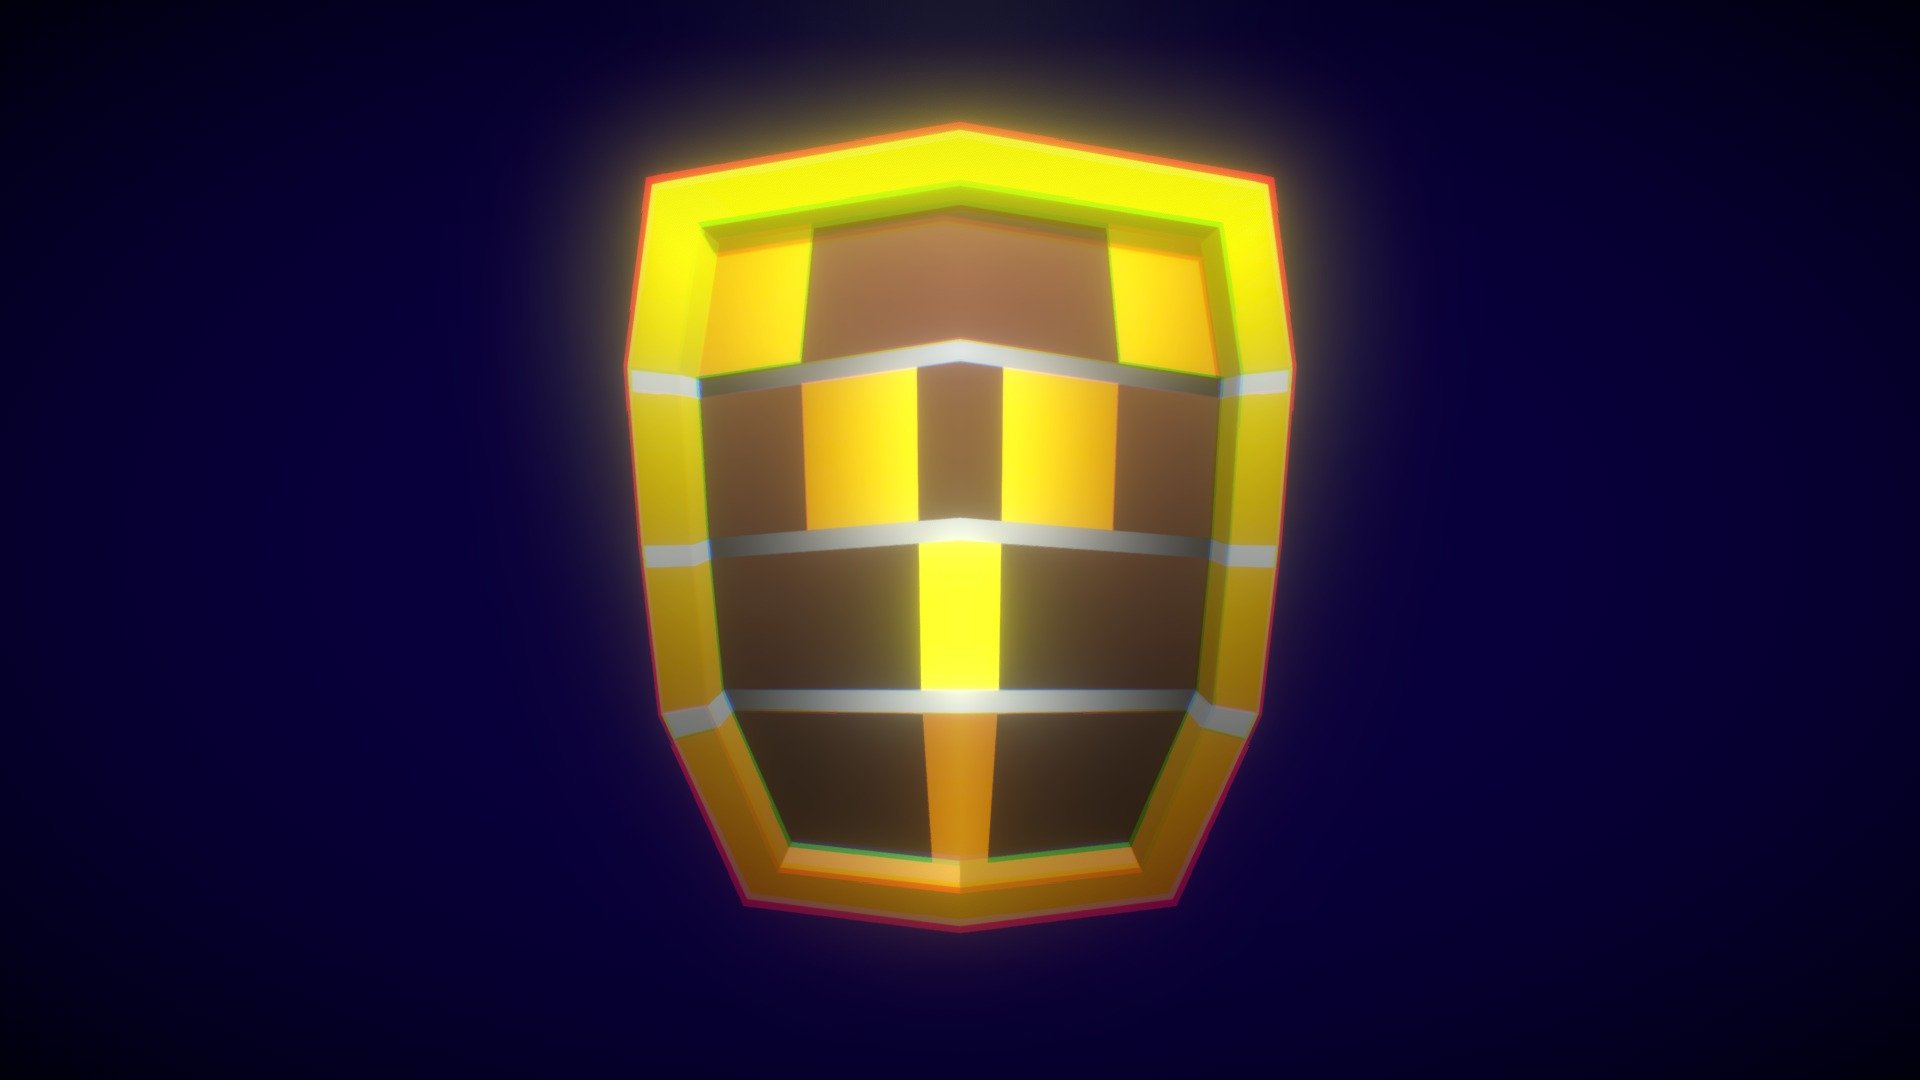 Low Poly Golden SHIELD.